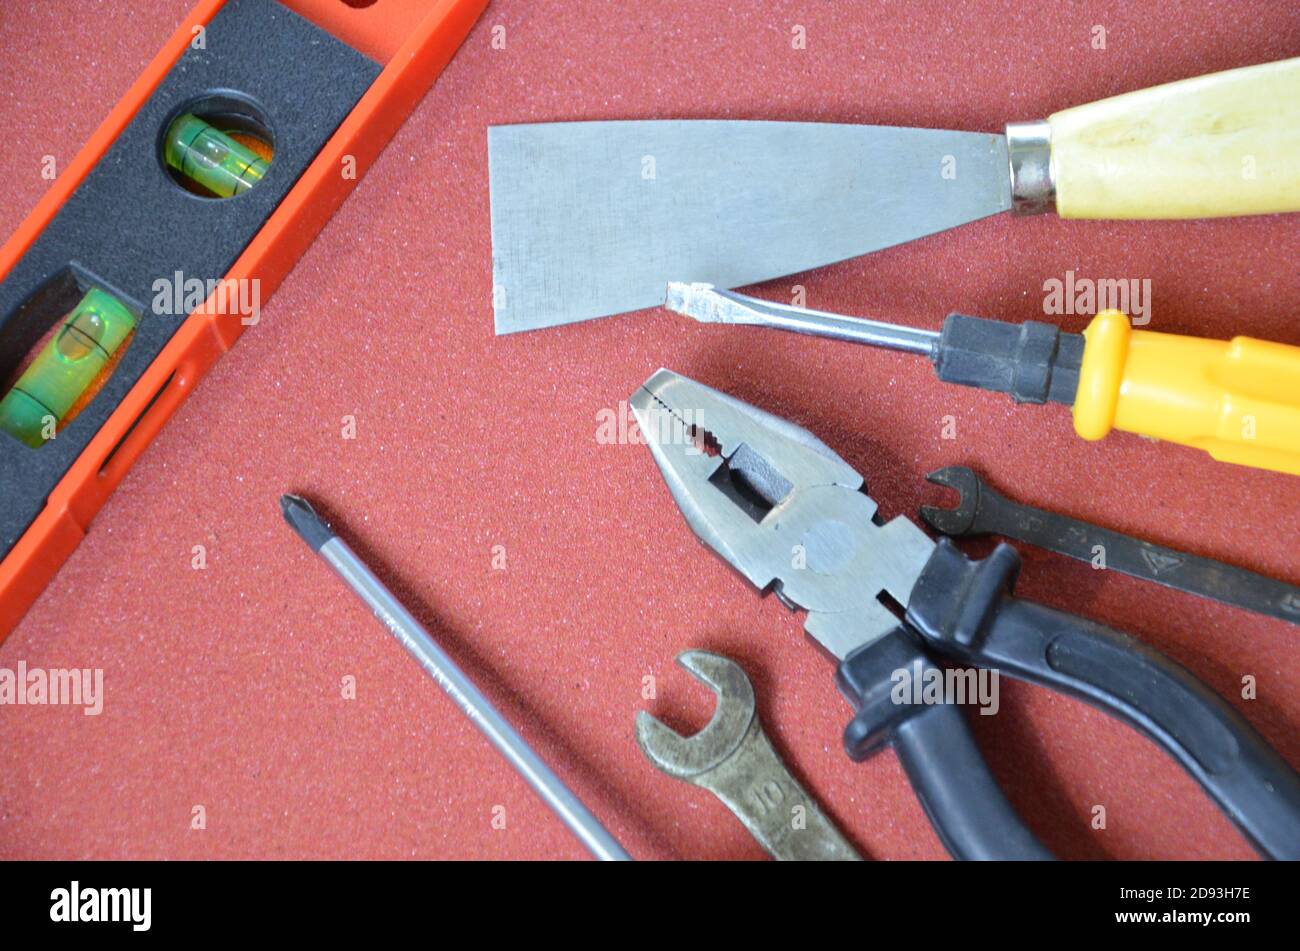 Top view of Working tools,wrench,socket wrench,hammer,screwdriver,plier,electric drill,tape measure,machinist square on wooden board. flat lay design. Stock Photo